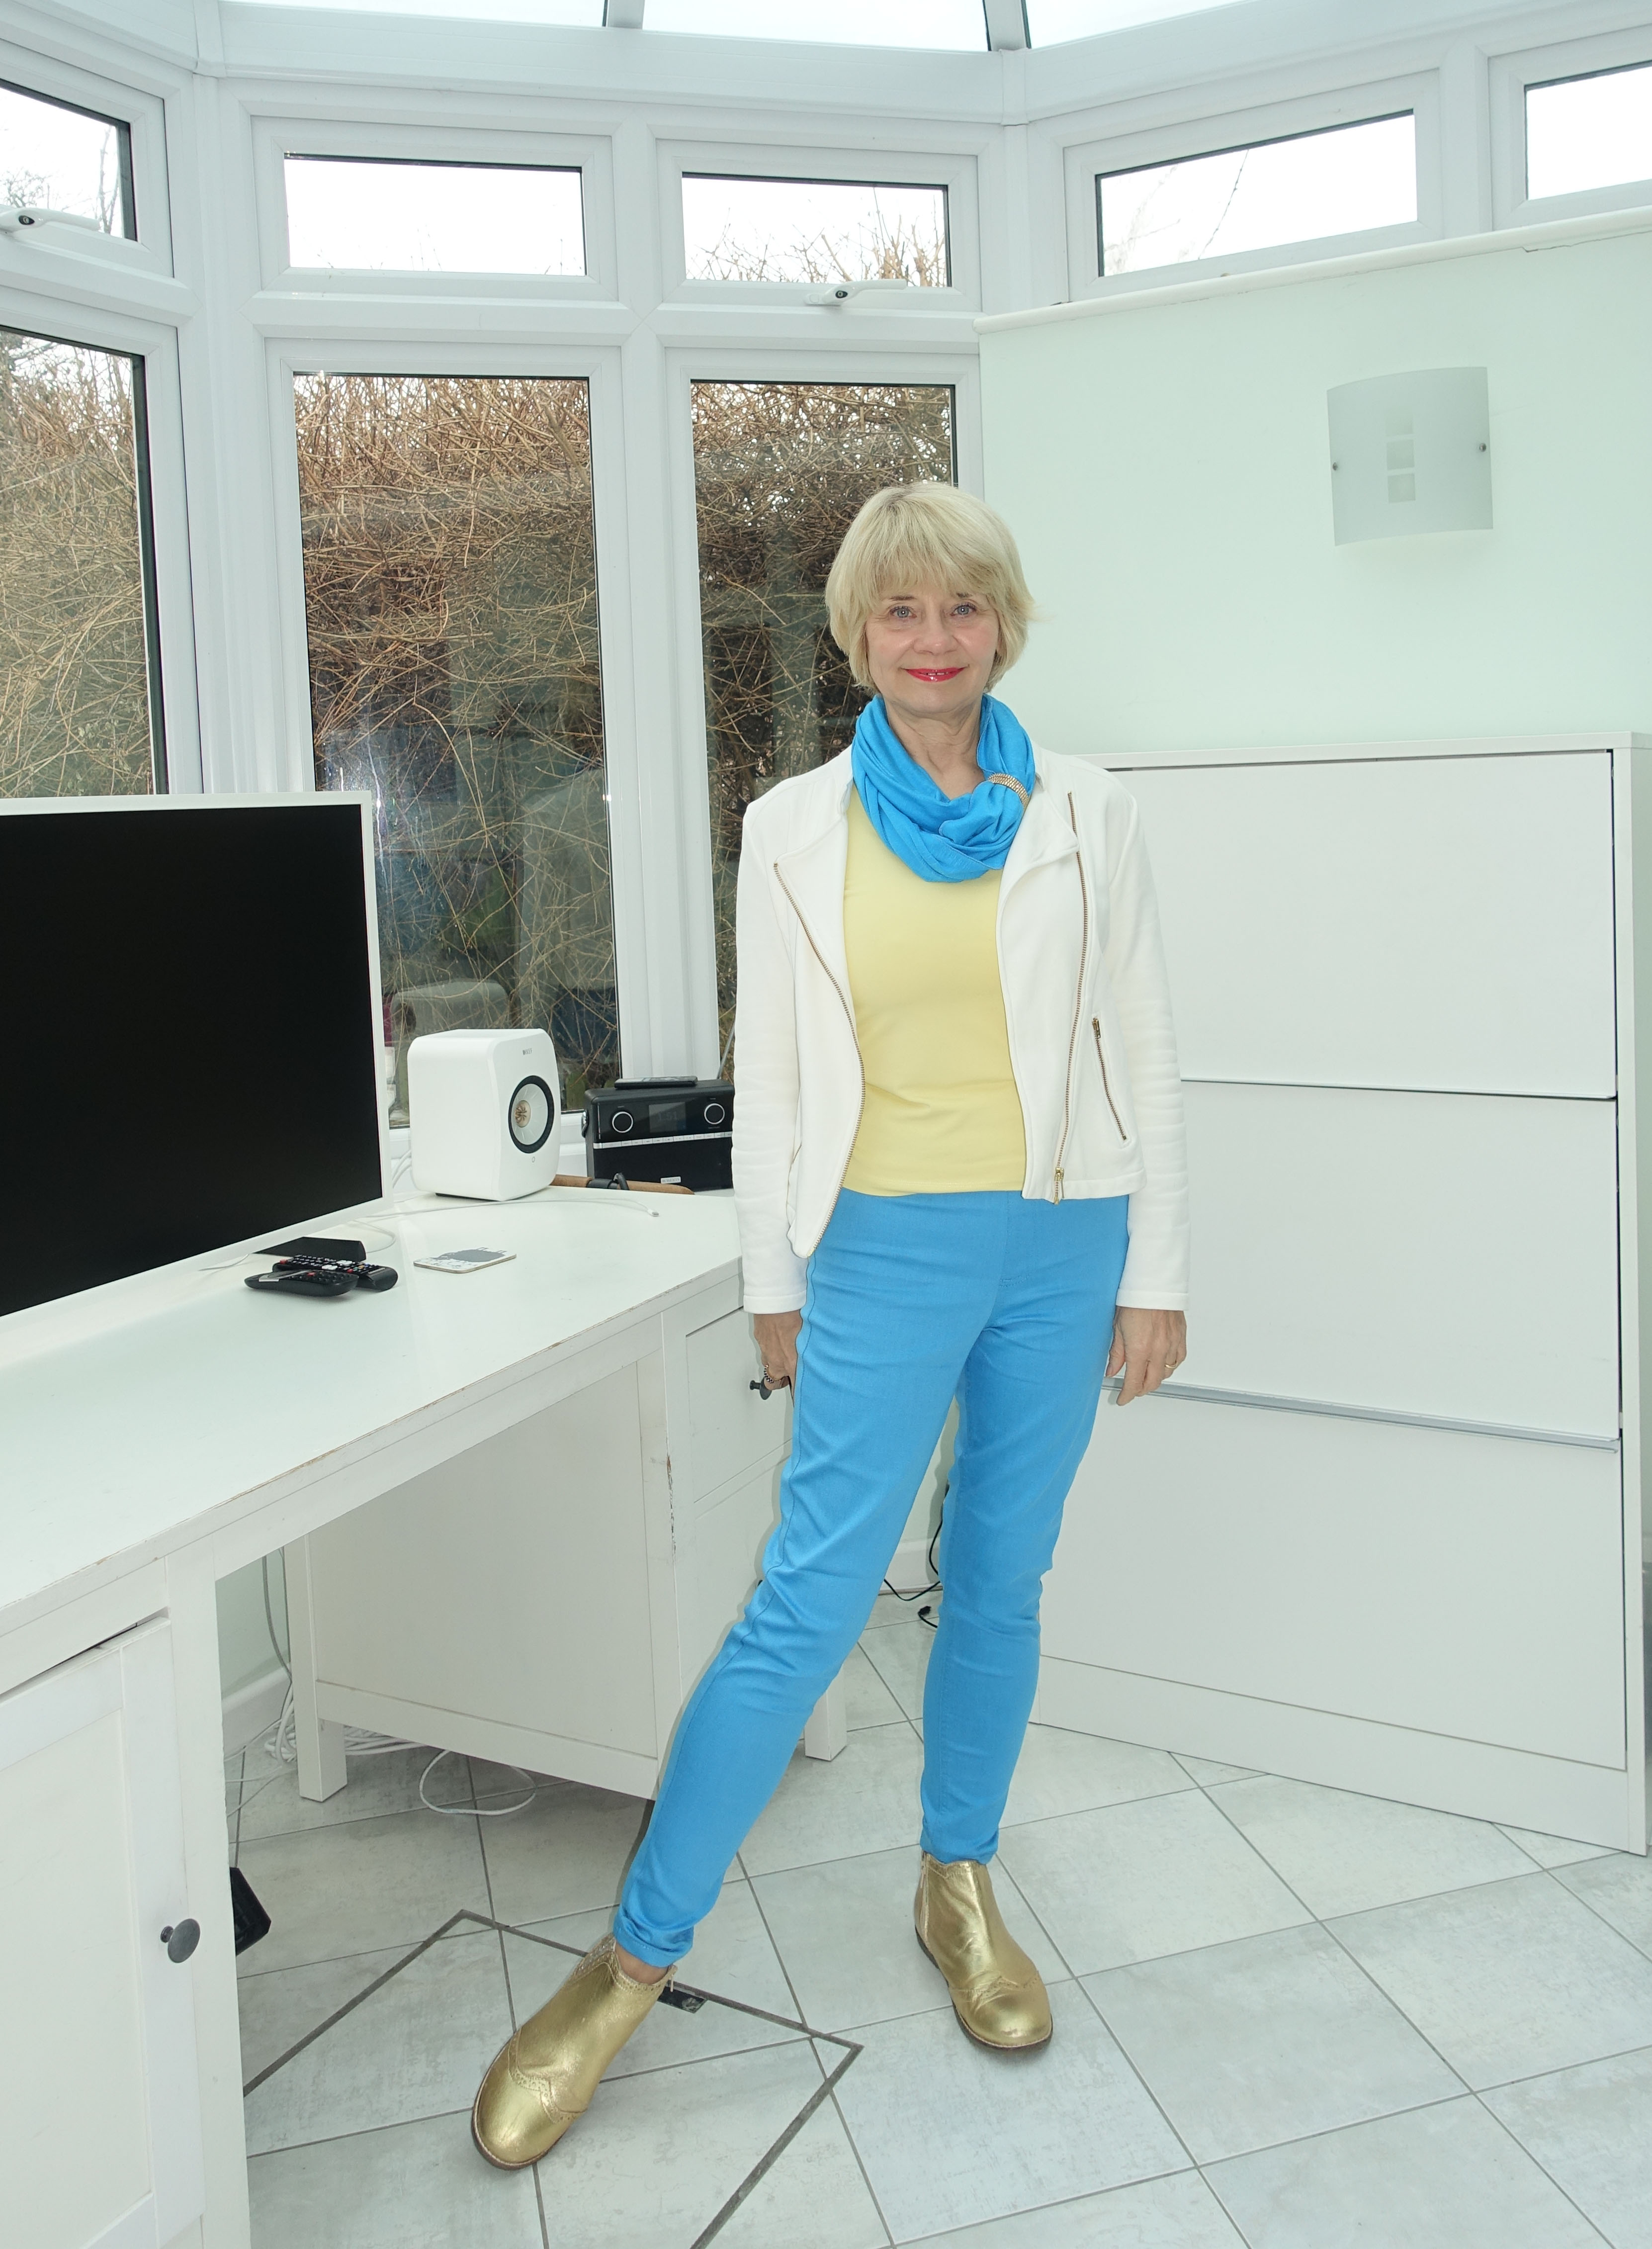 Over-60s blogger Gail Hanlon in turquoise and yellow